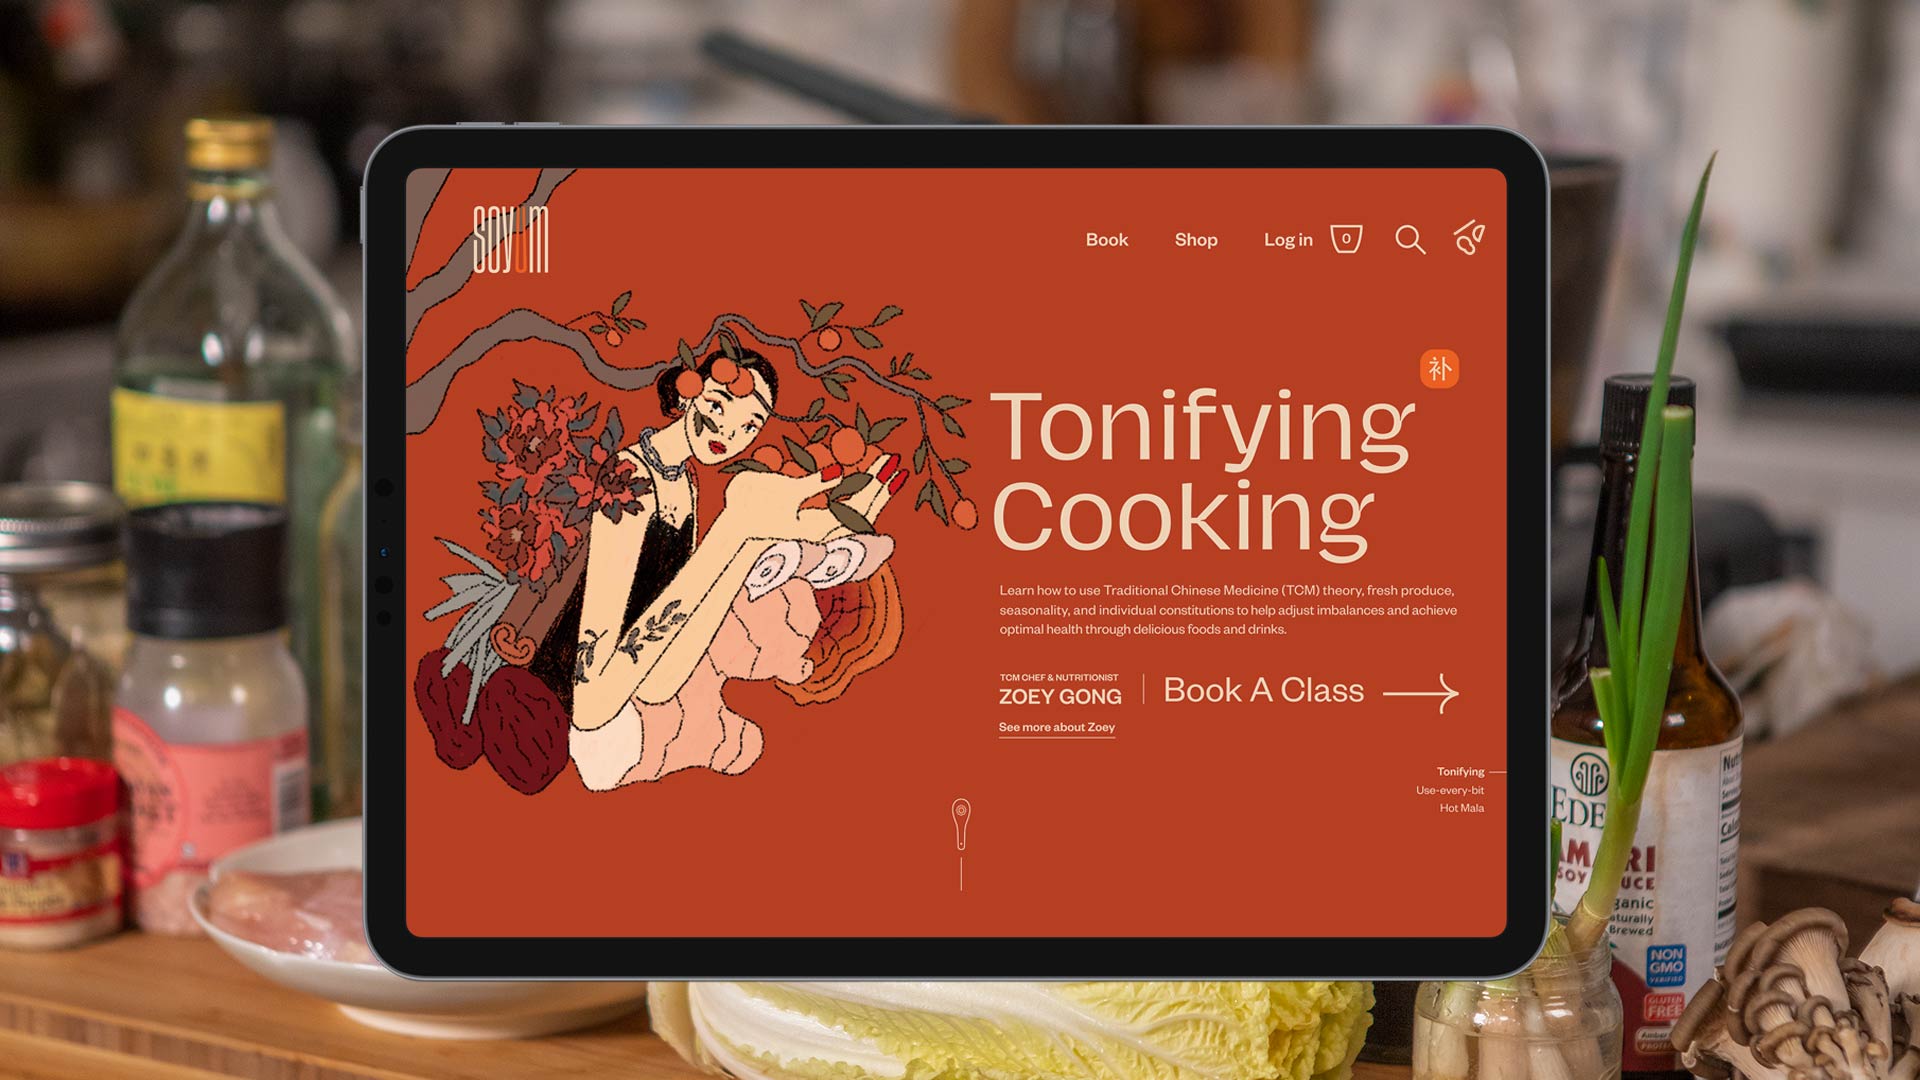 An iPad view showing Soyum website homepage against a kitchen background with Asian ingredients and condiments on the table